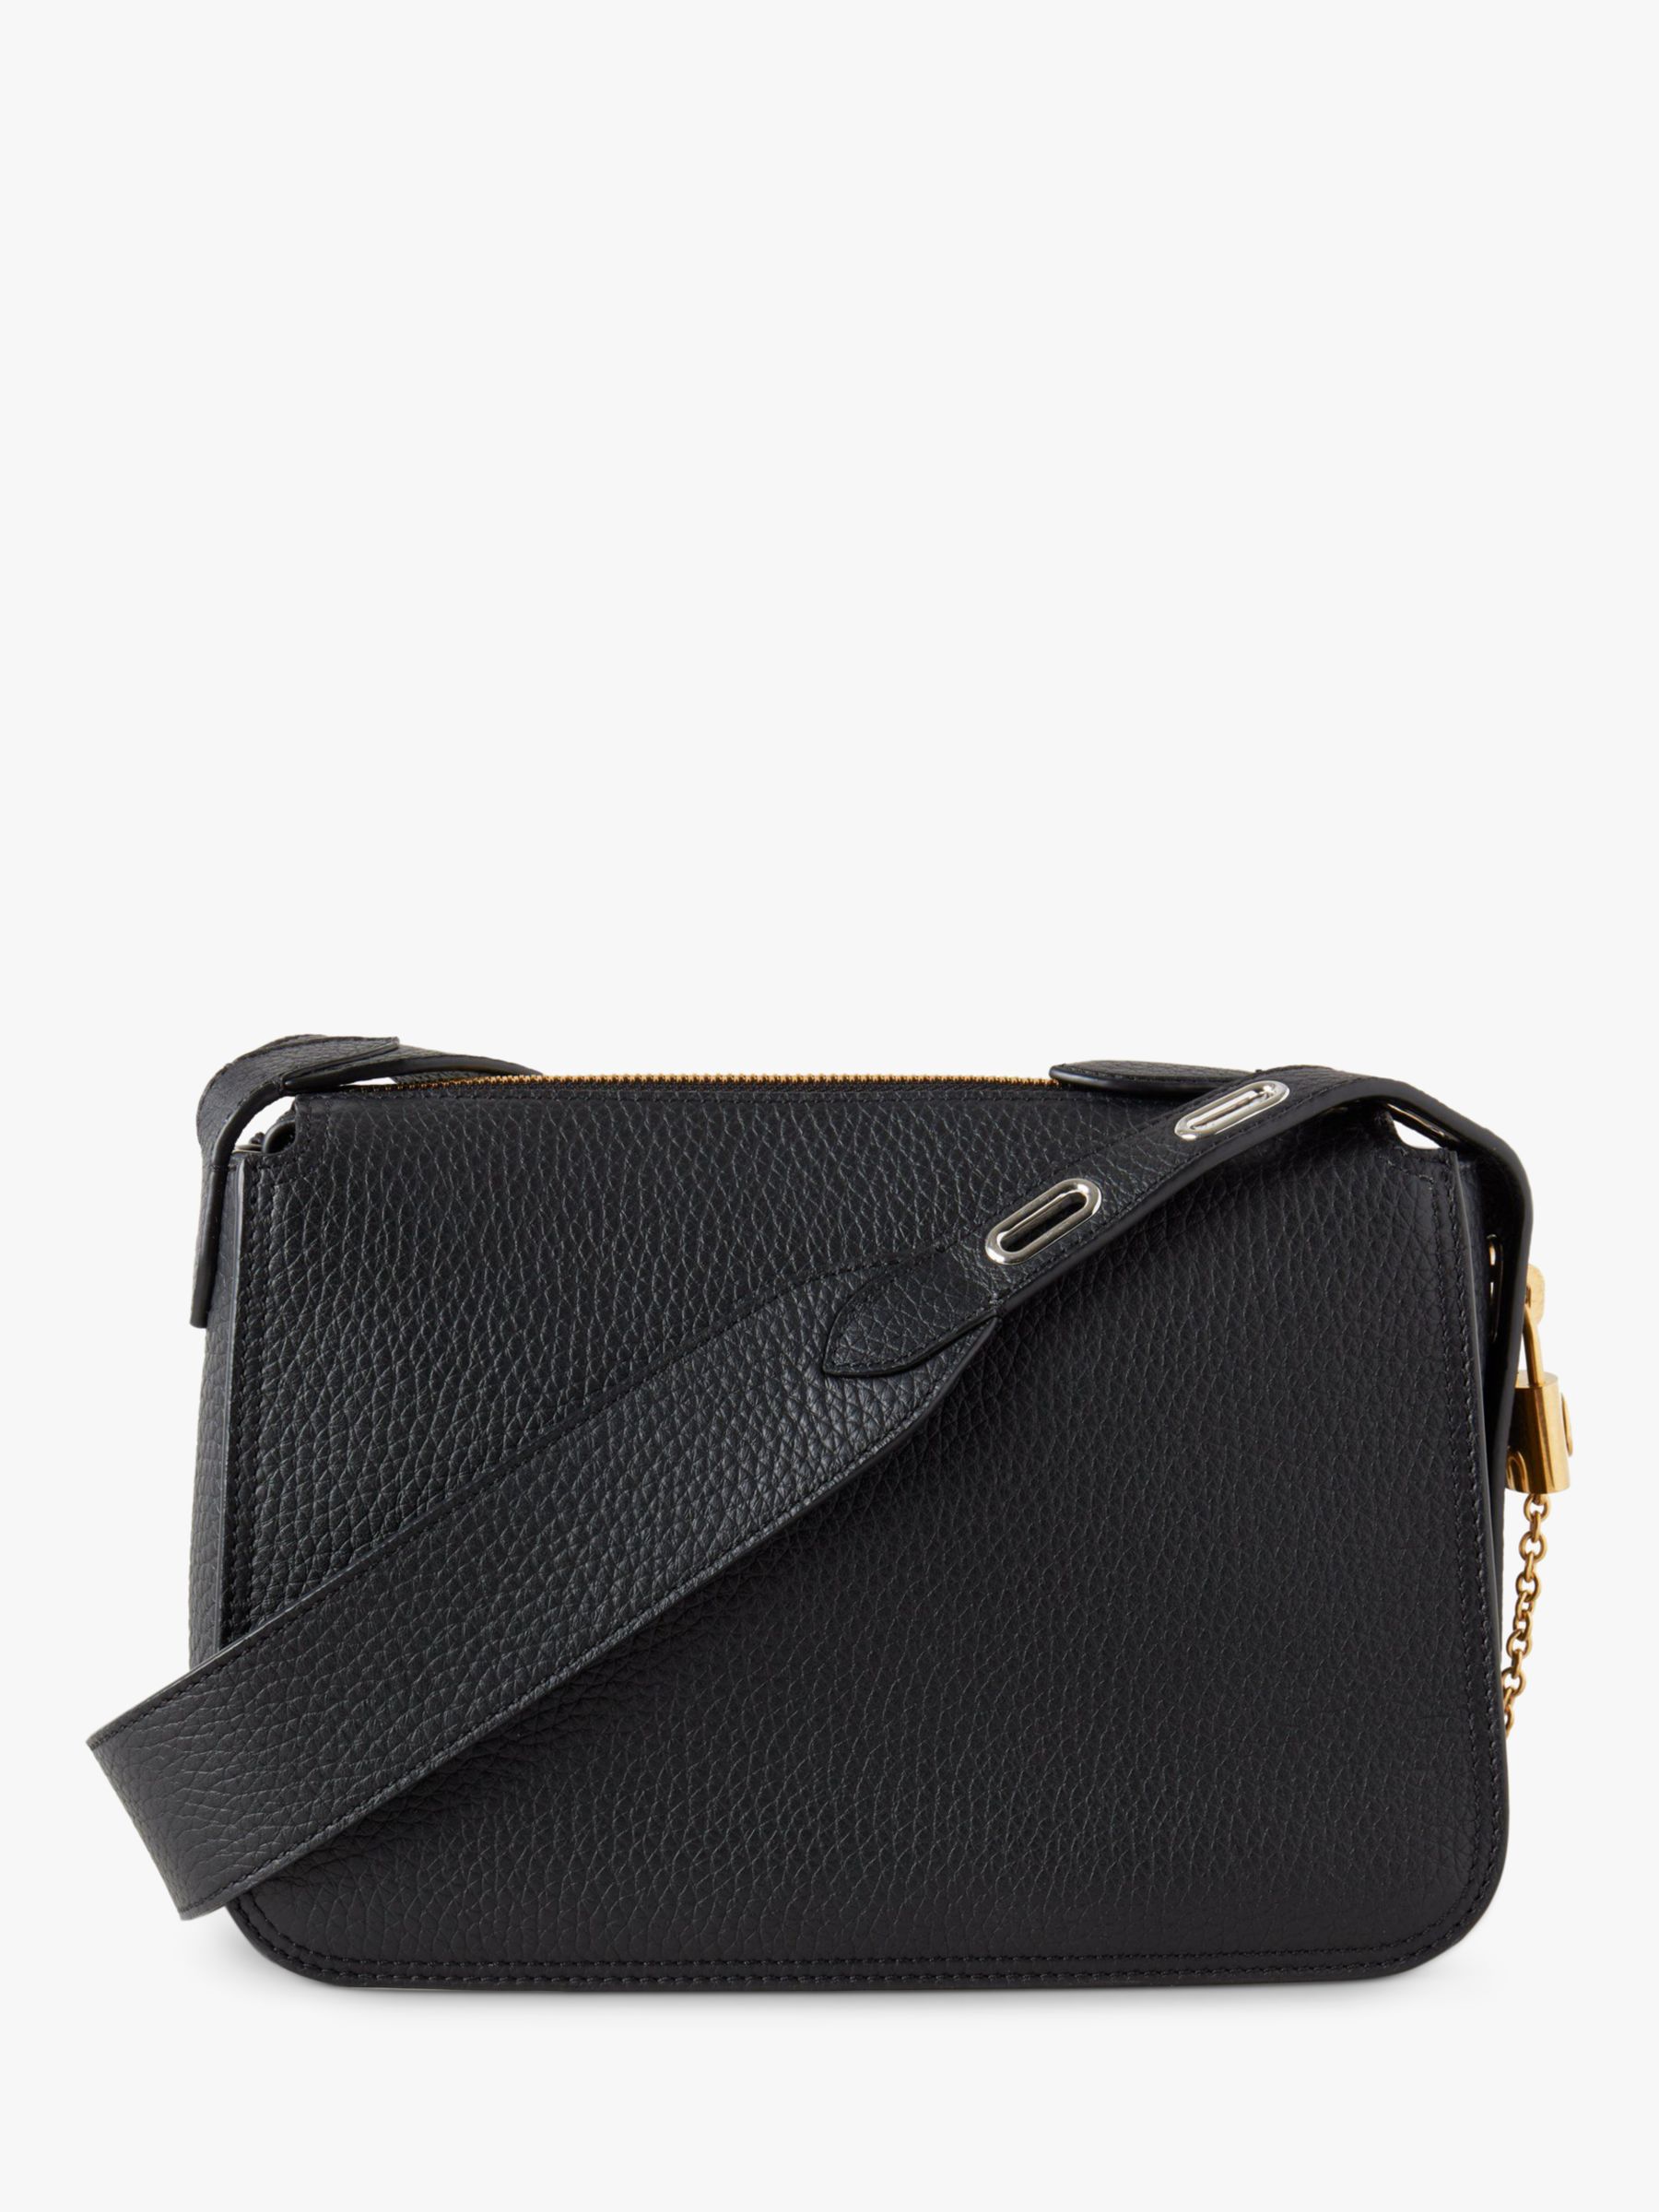 Mulberry Billie Small Classic Grain Leather Cross Body Bag